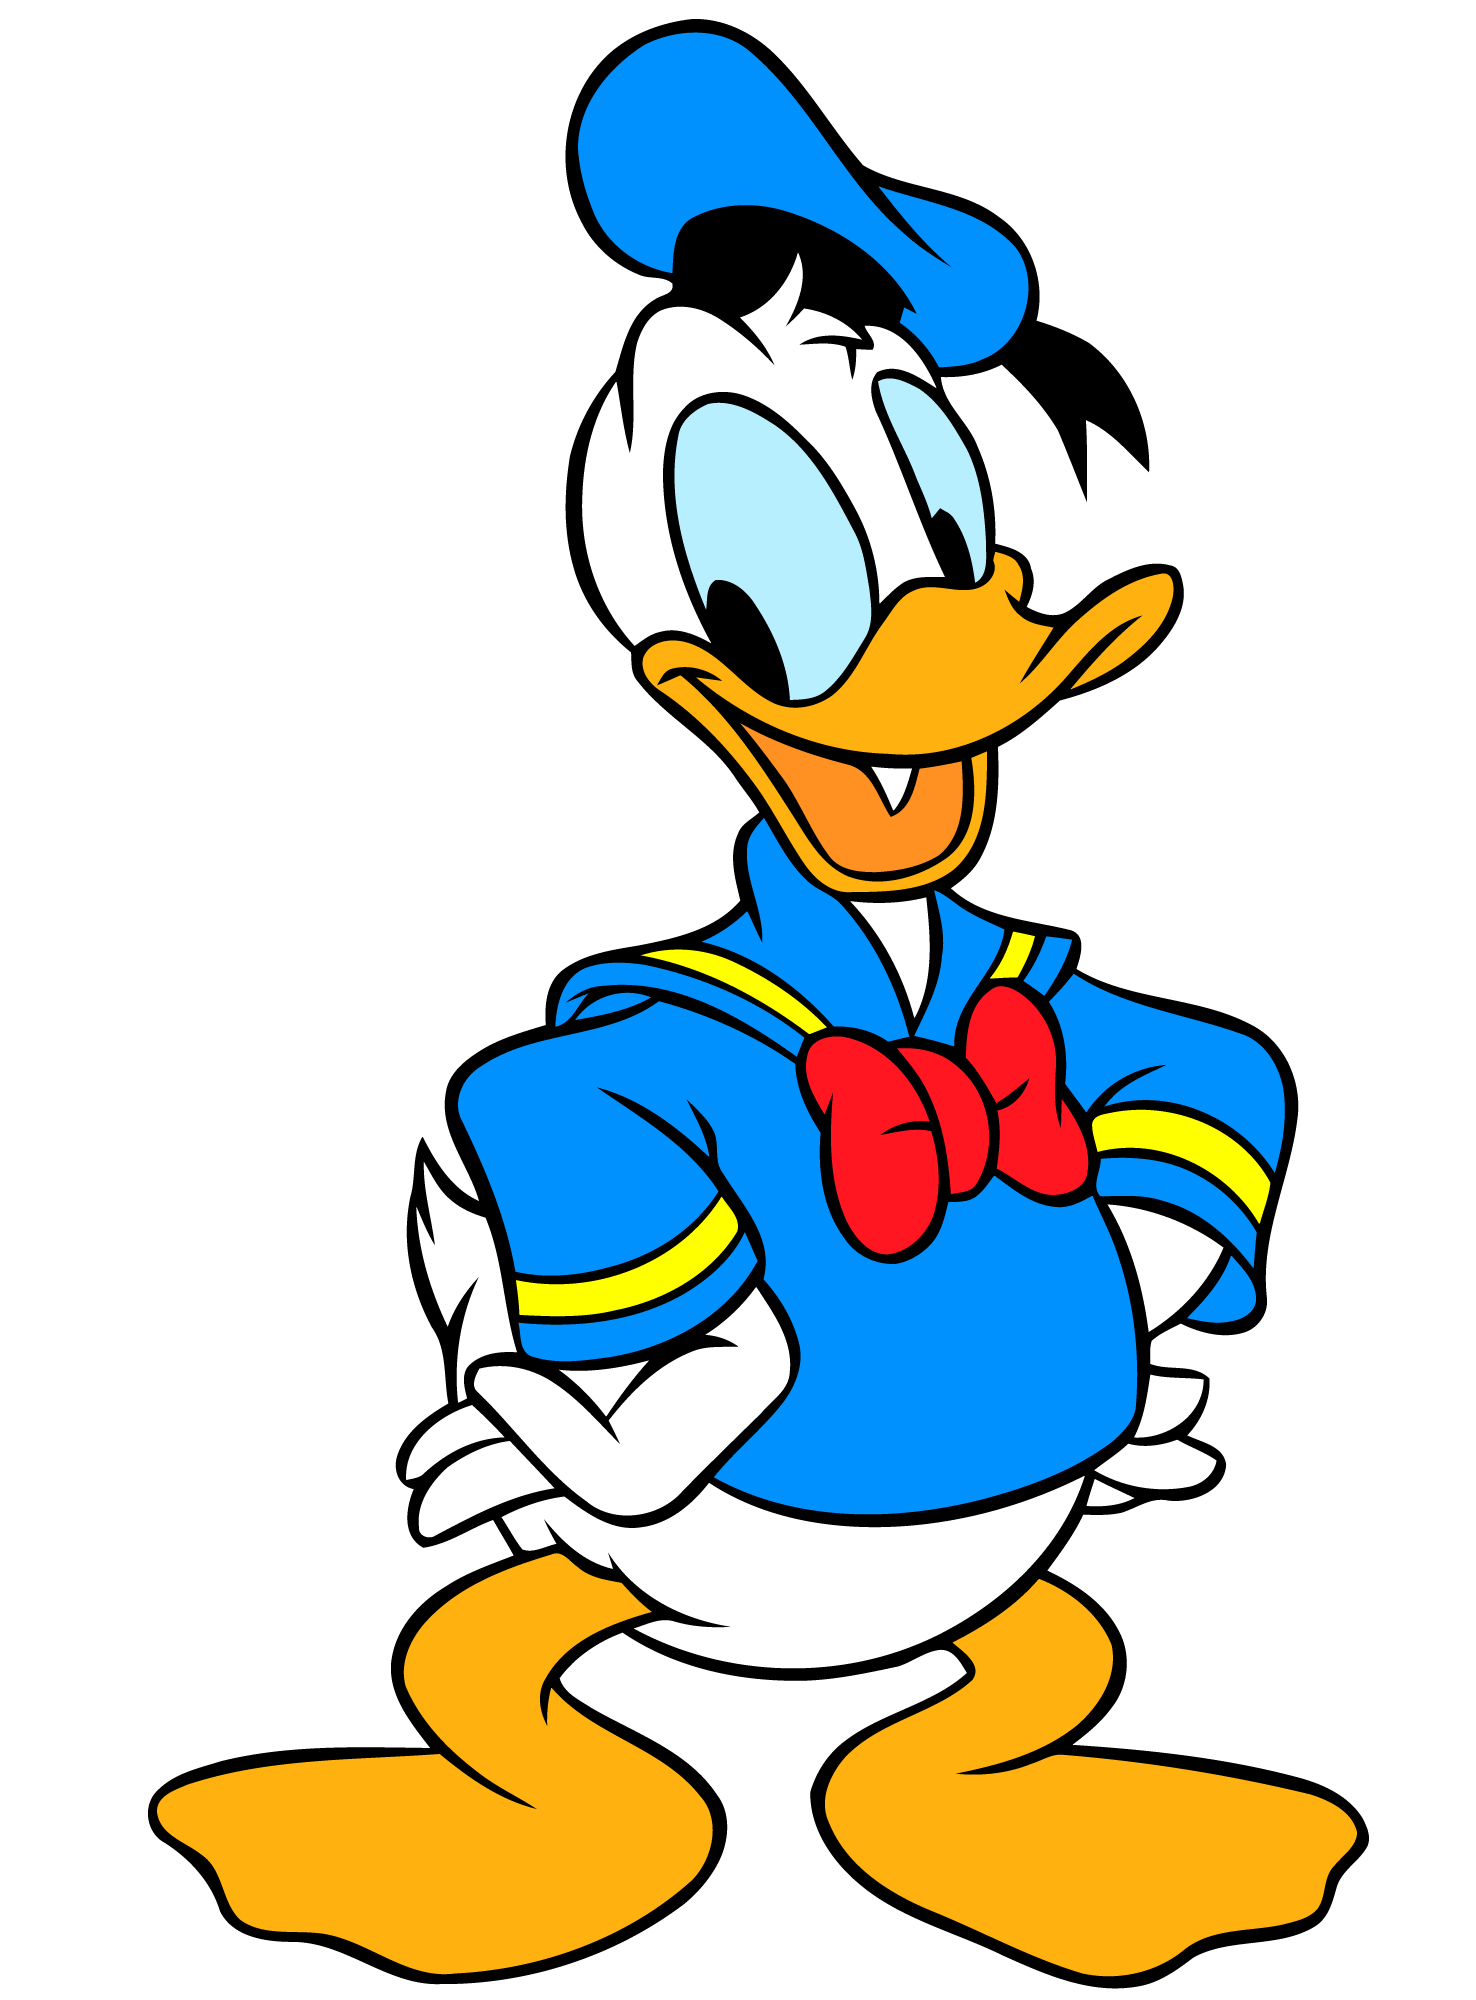 Donald Duck PNG HD